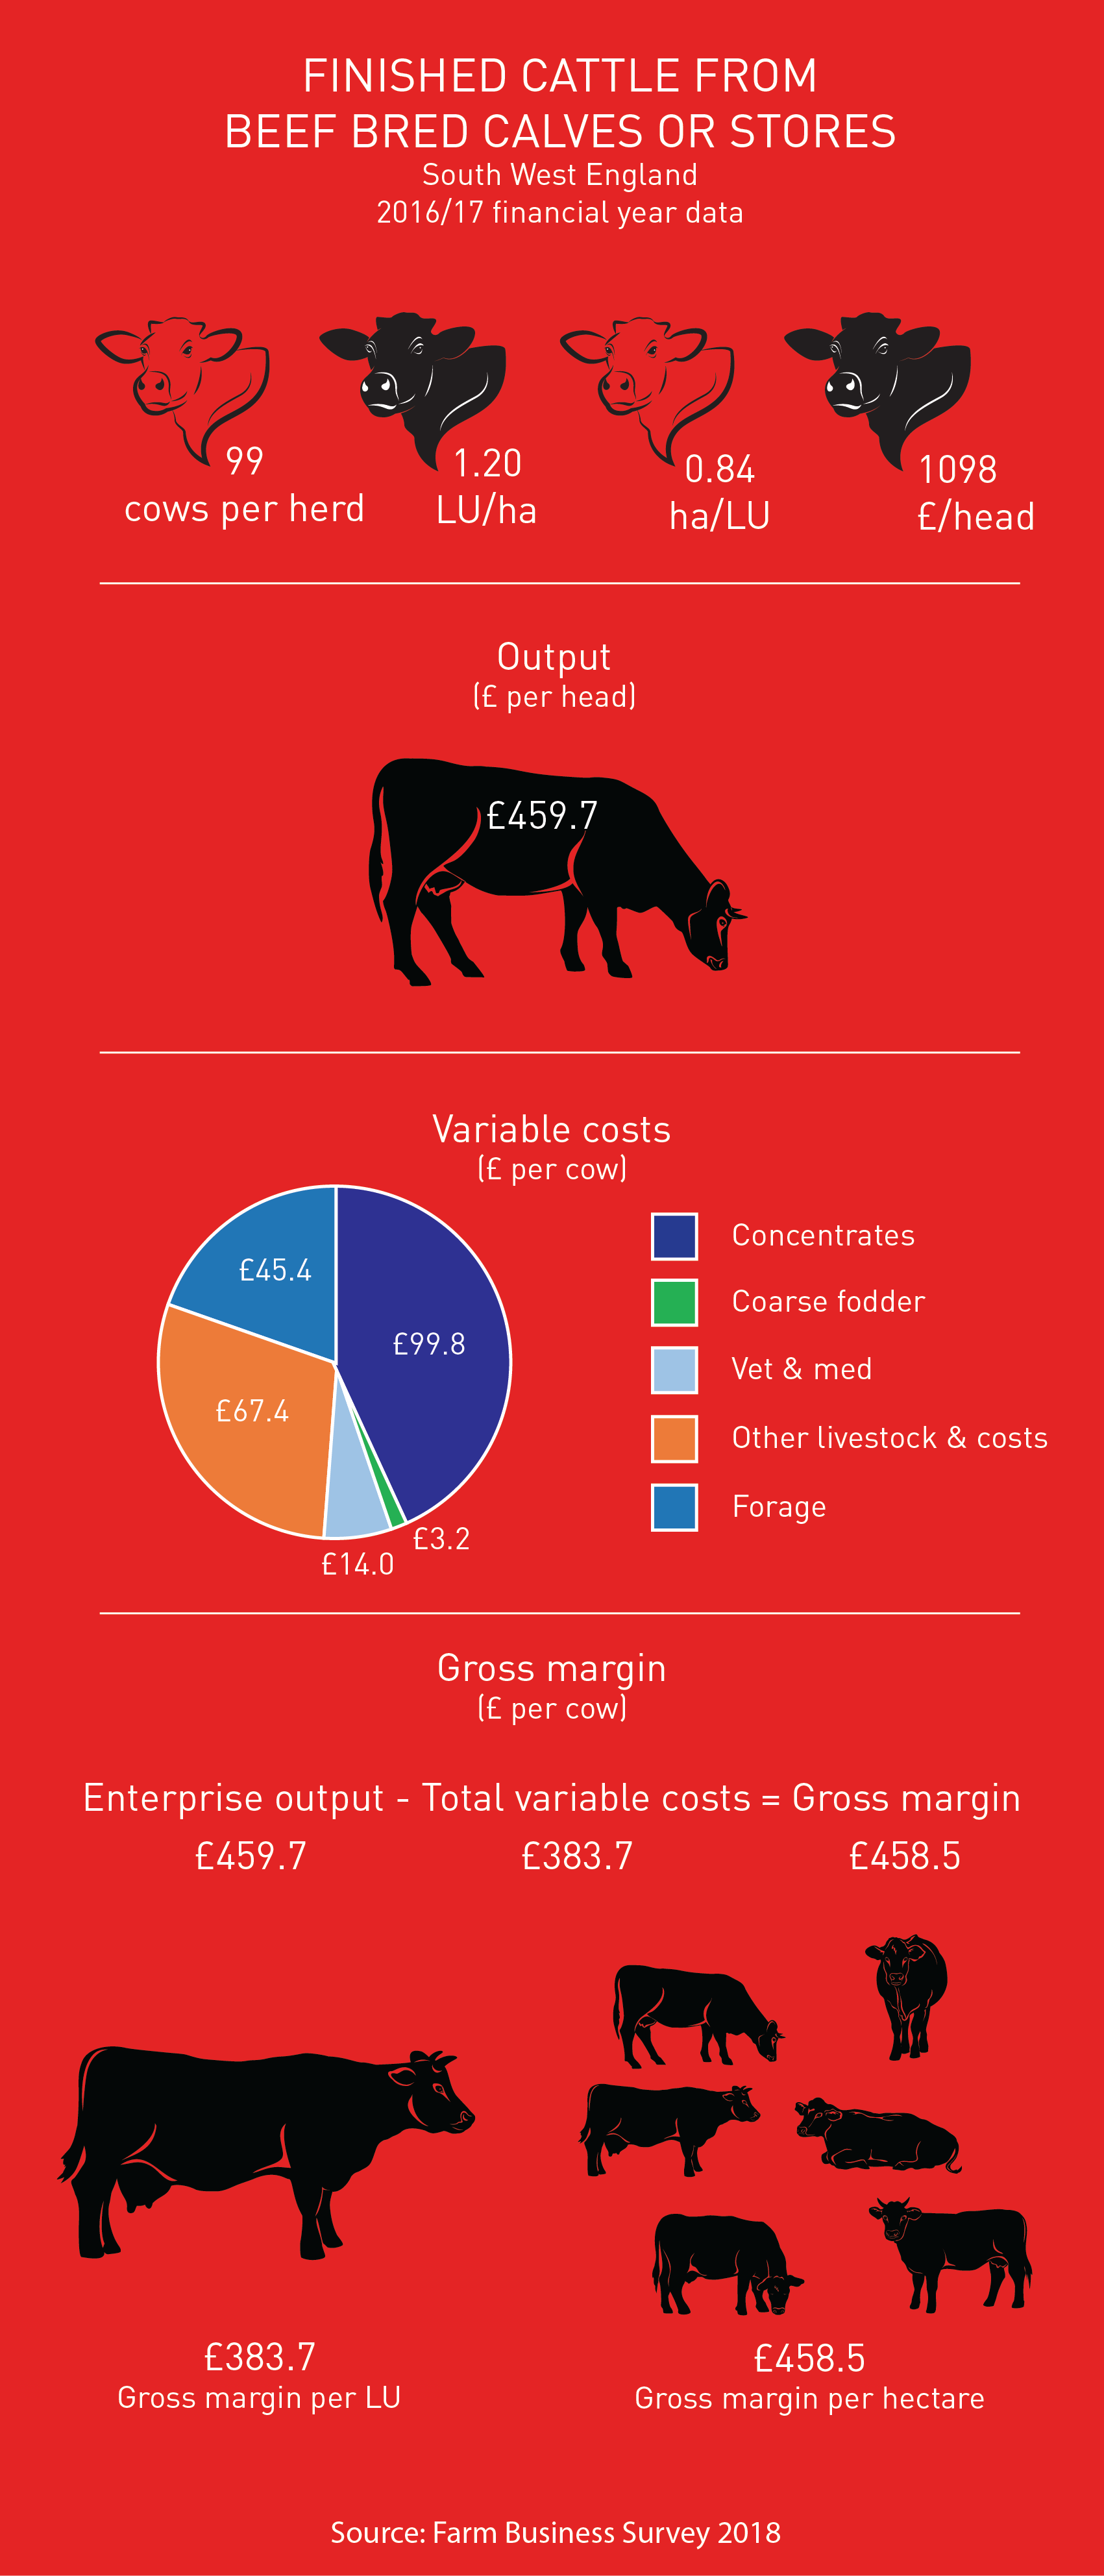 Finished cattle from beef bred calves or stores gross margin